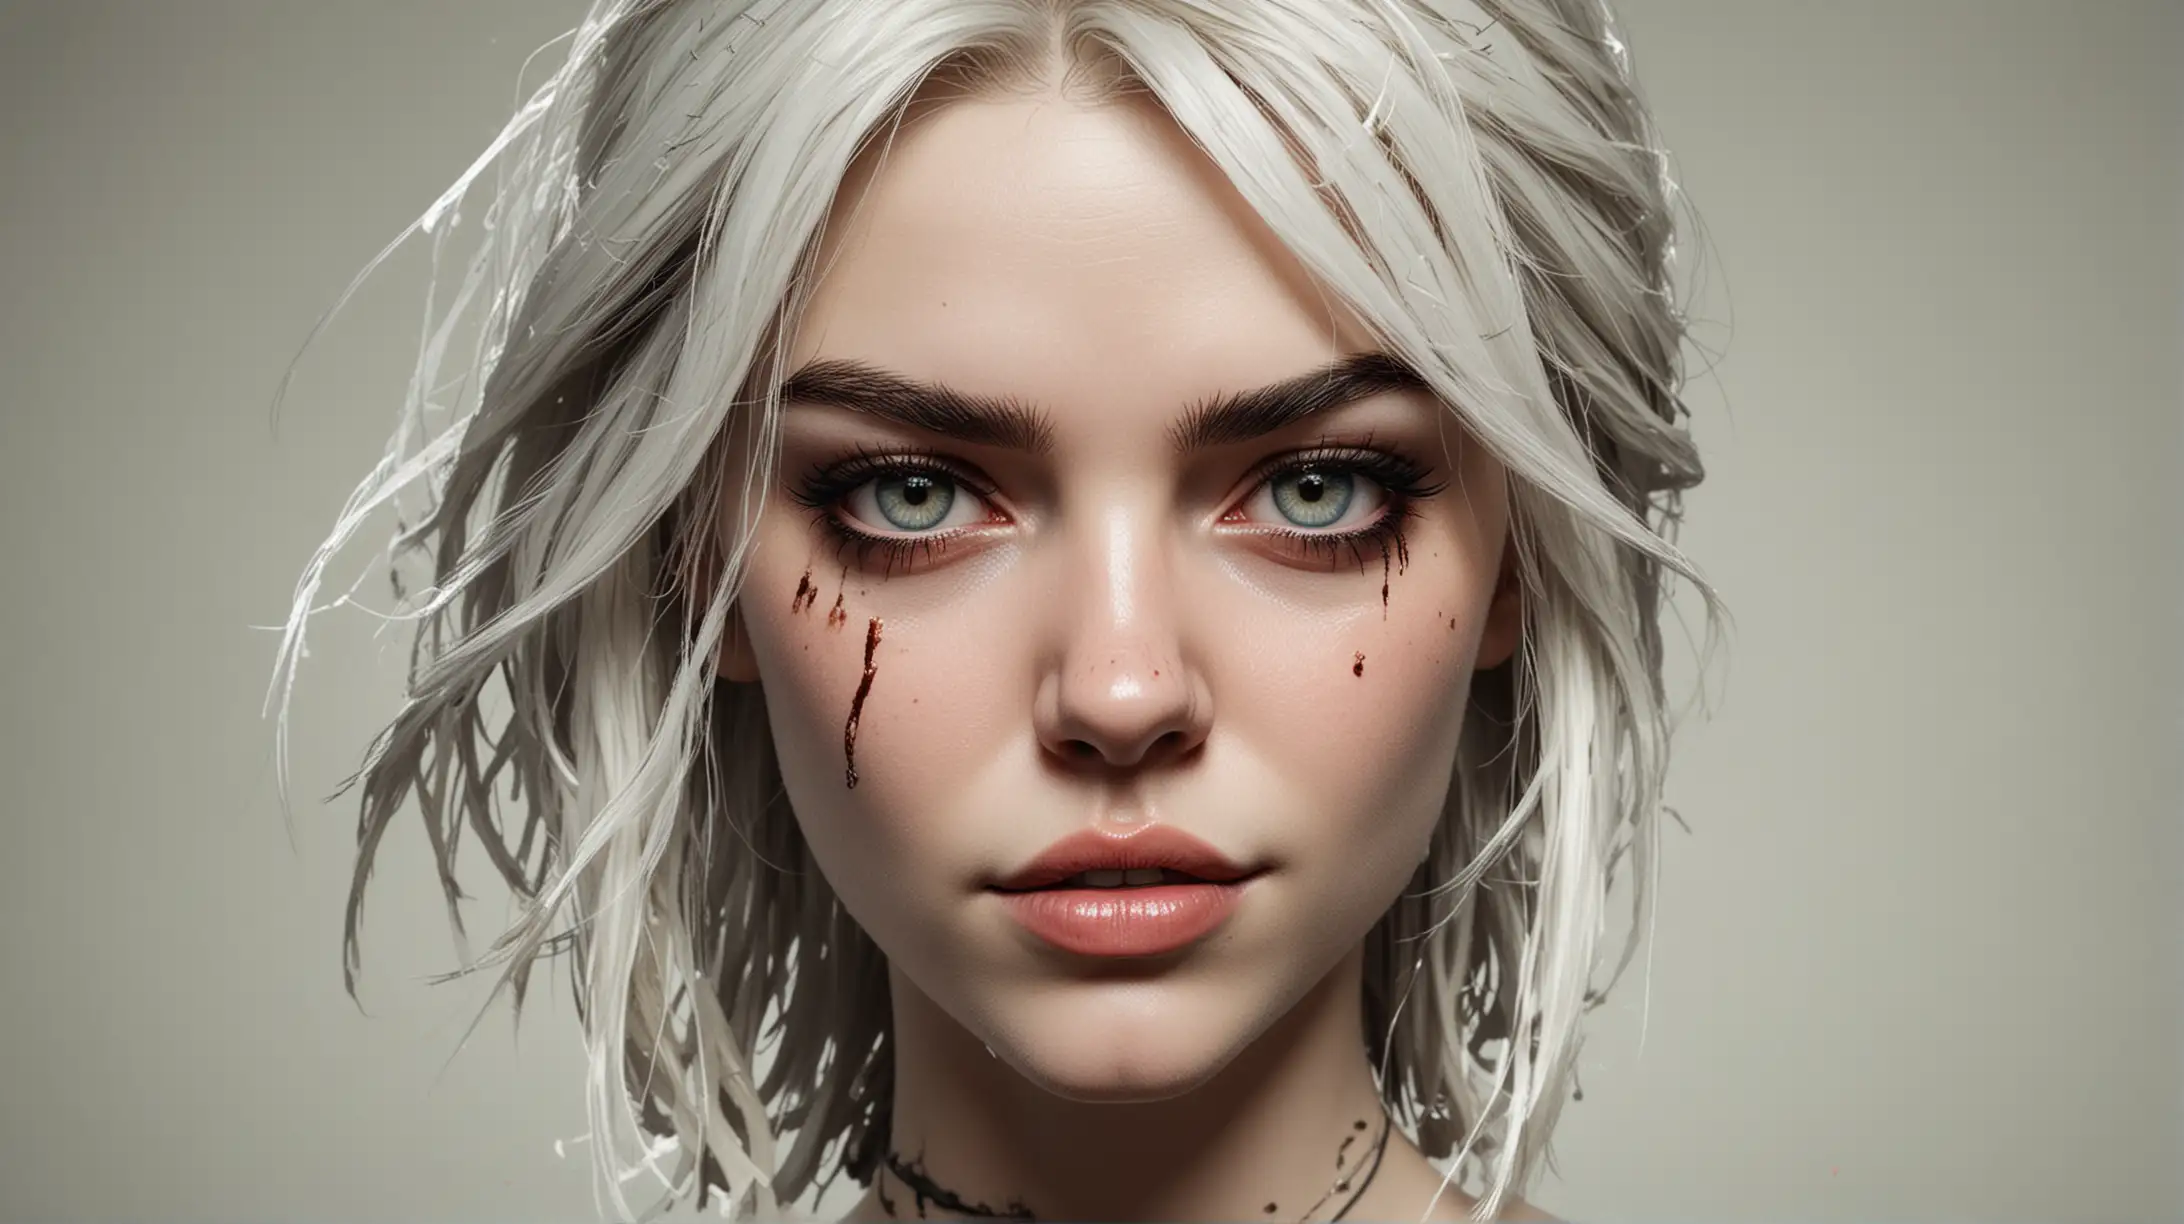 Anya Taylor-Joy as sexy Ciry from Witcher 3 game, in the style of Ralph Steadman, no background